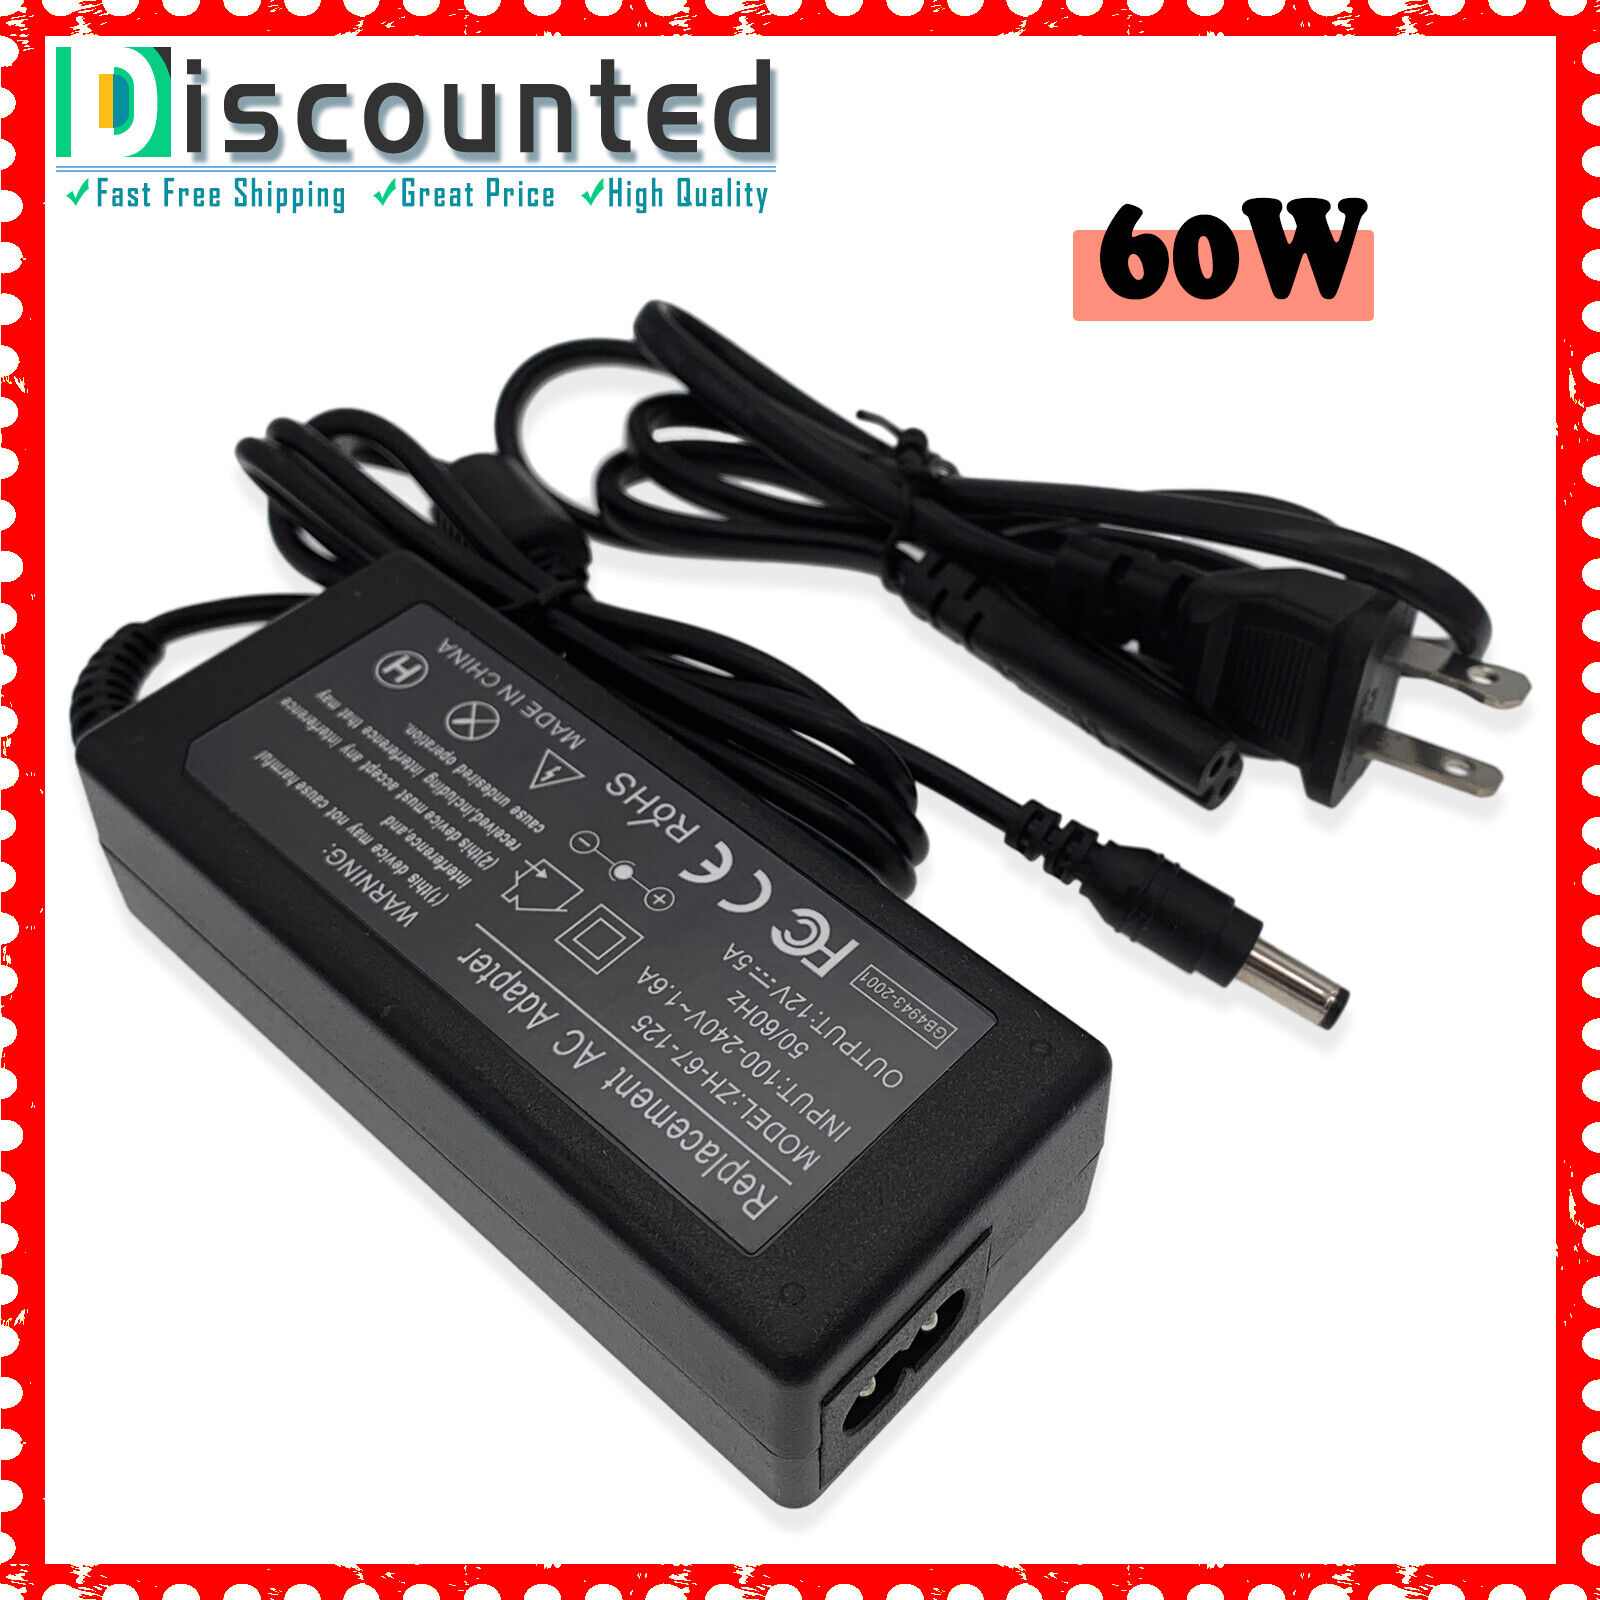 Adapter Charger For Arcade1up Game Machines Arcade 1up Fits ALL Riser Power Cord